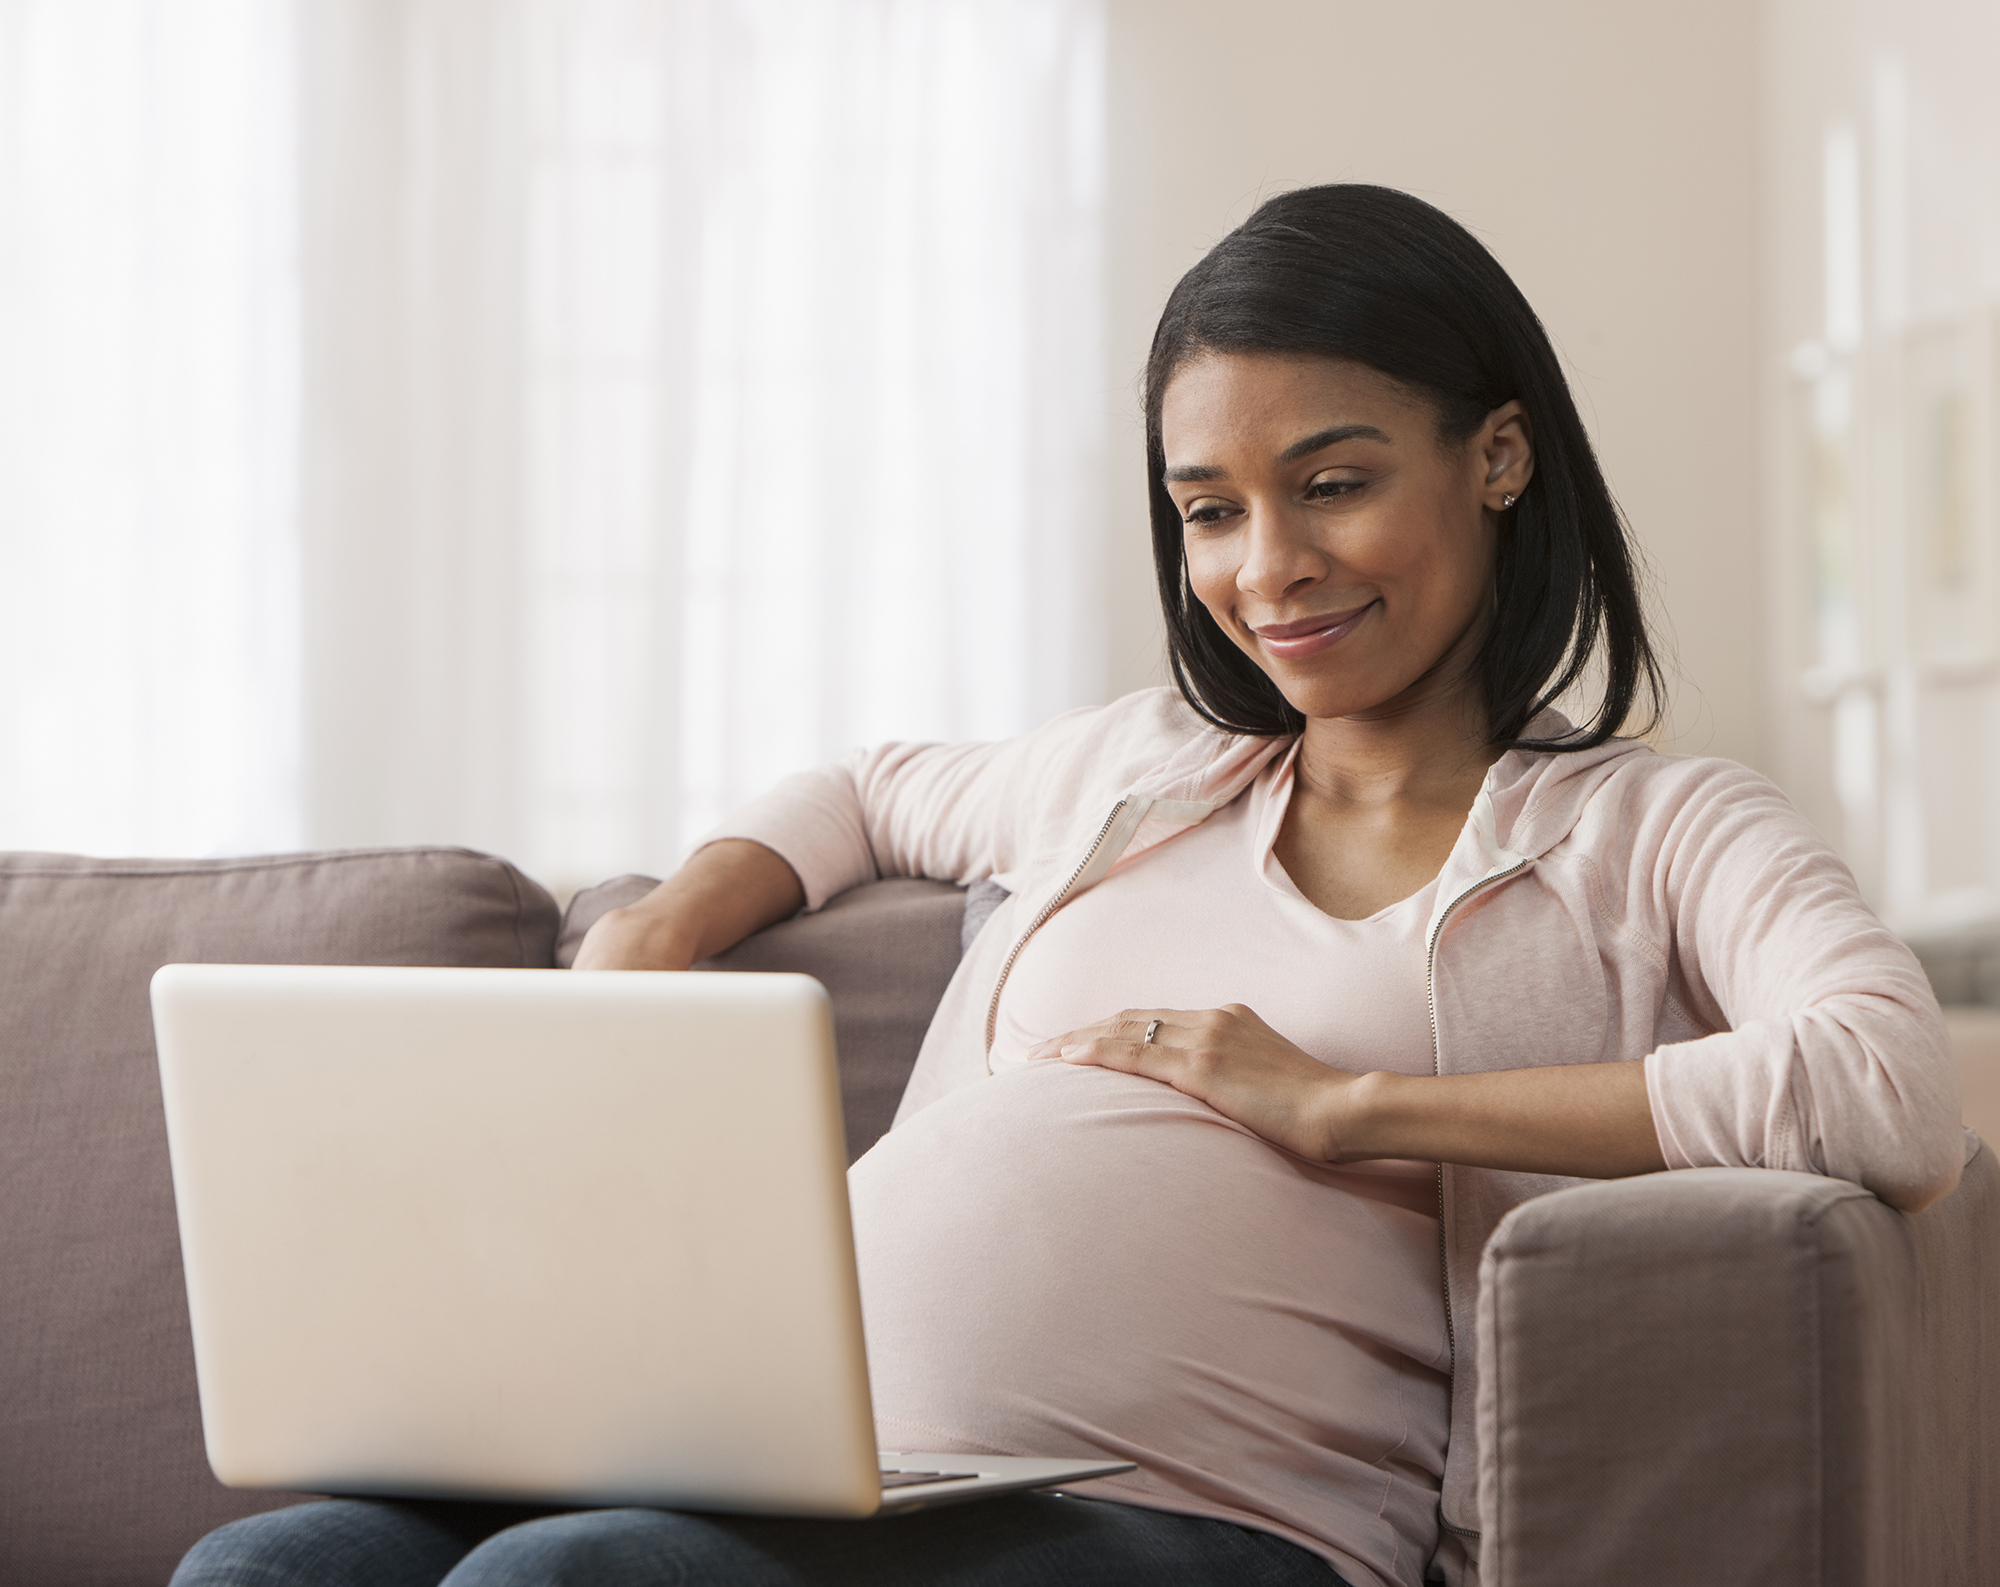 Pregnant woman making online purchase